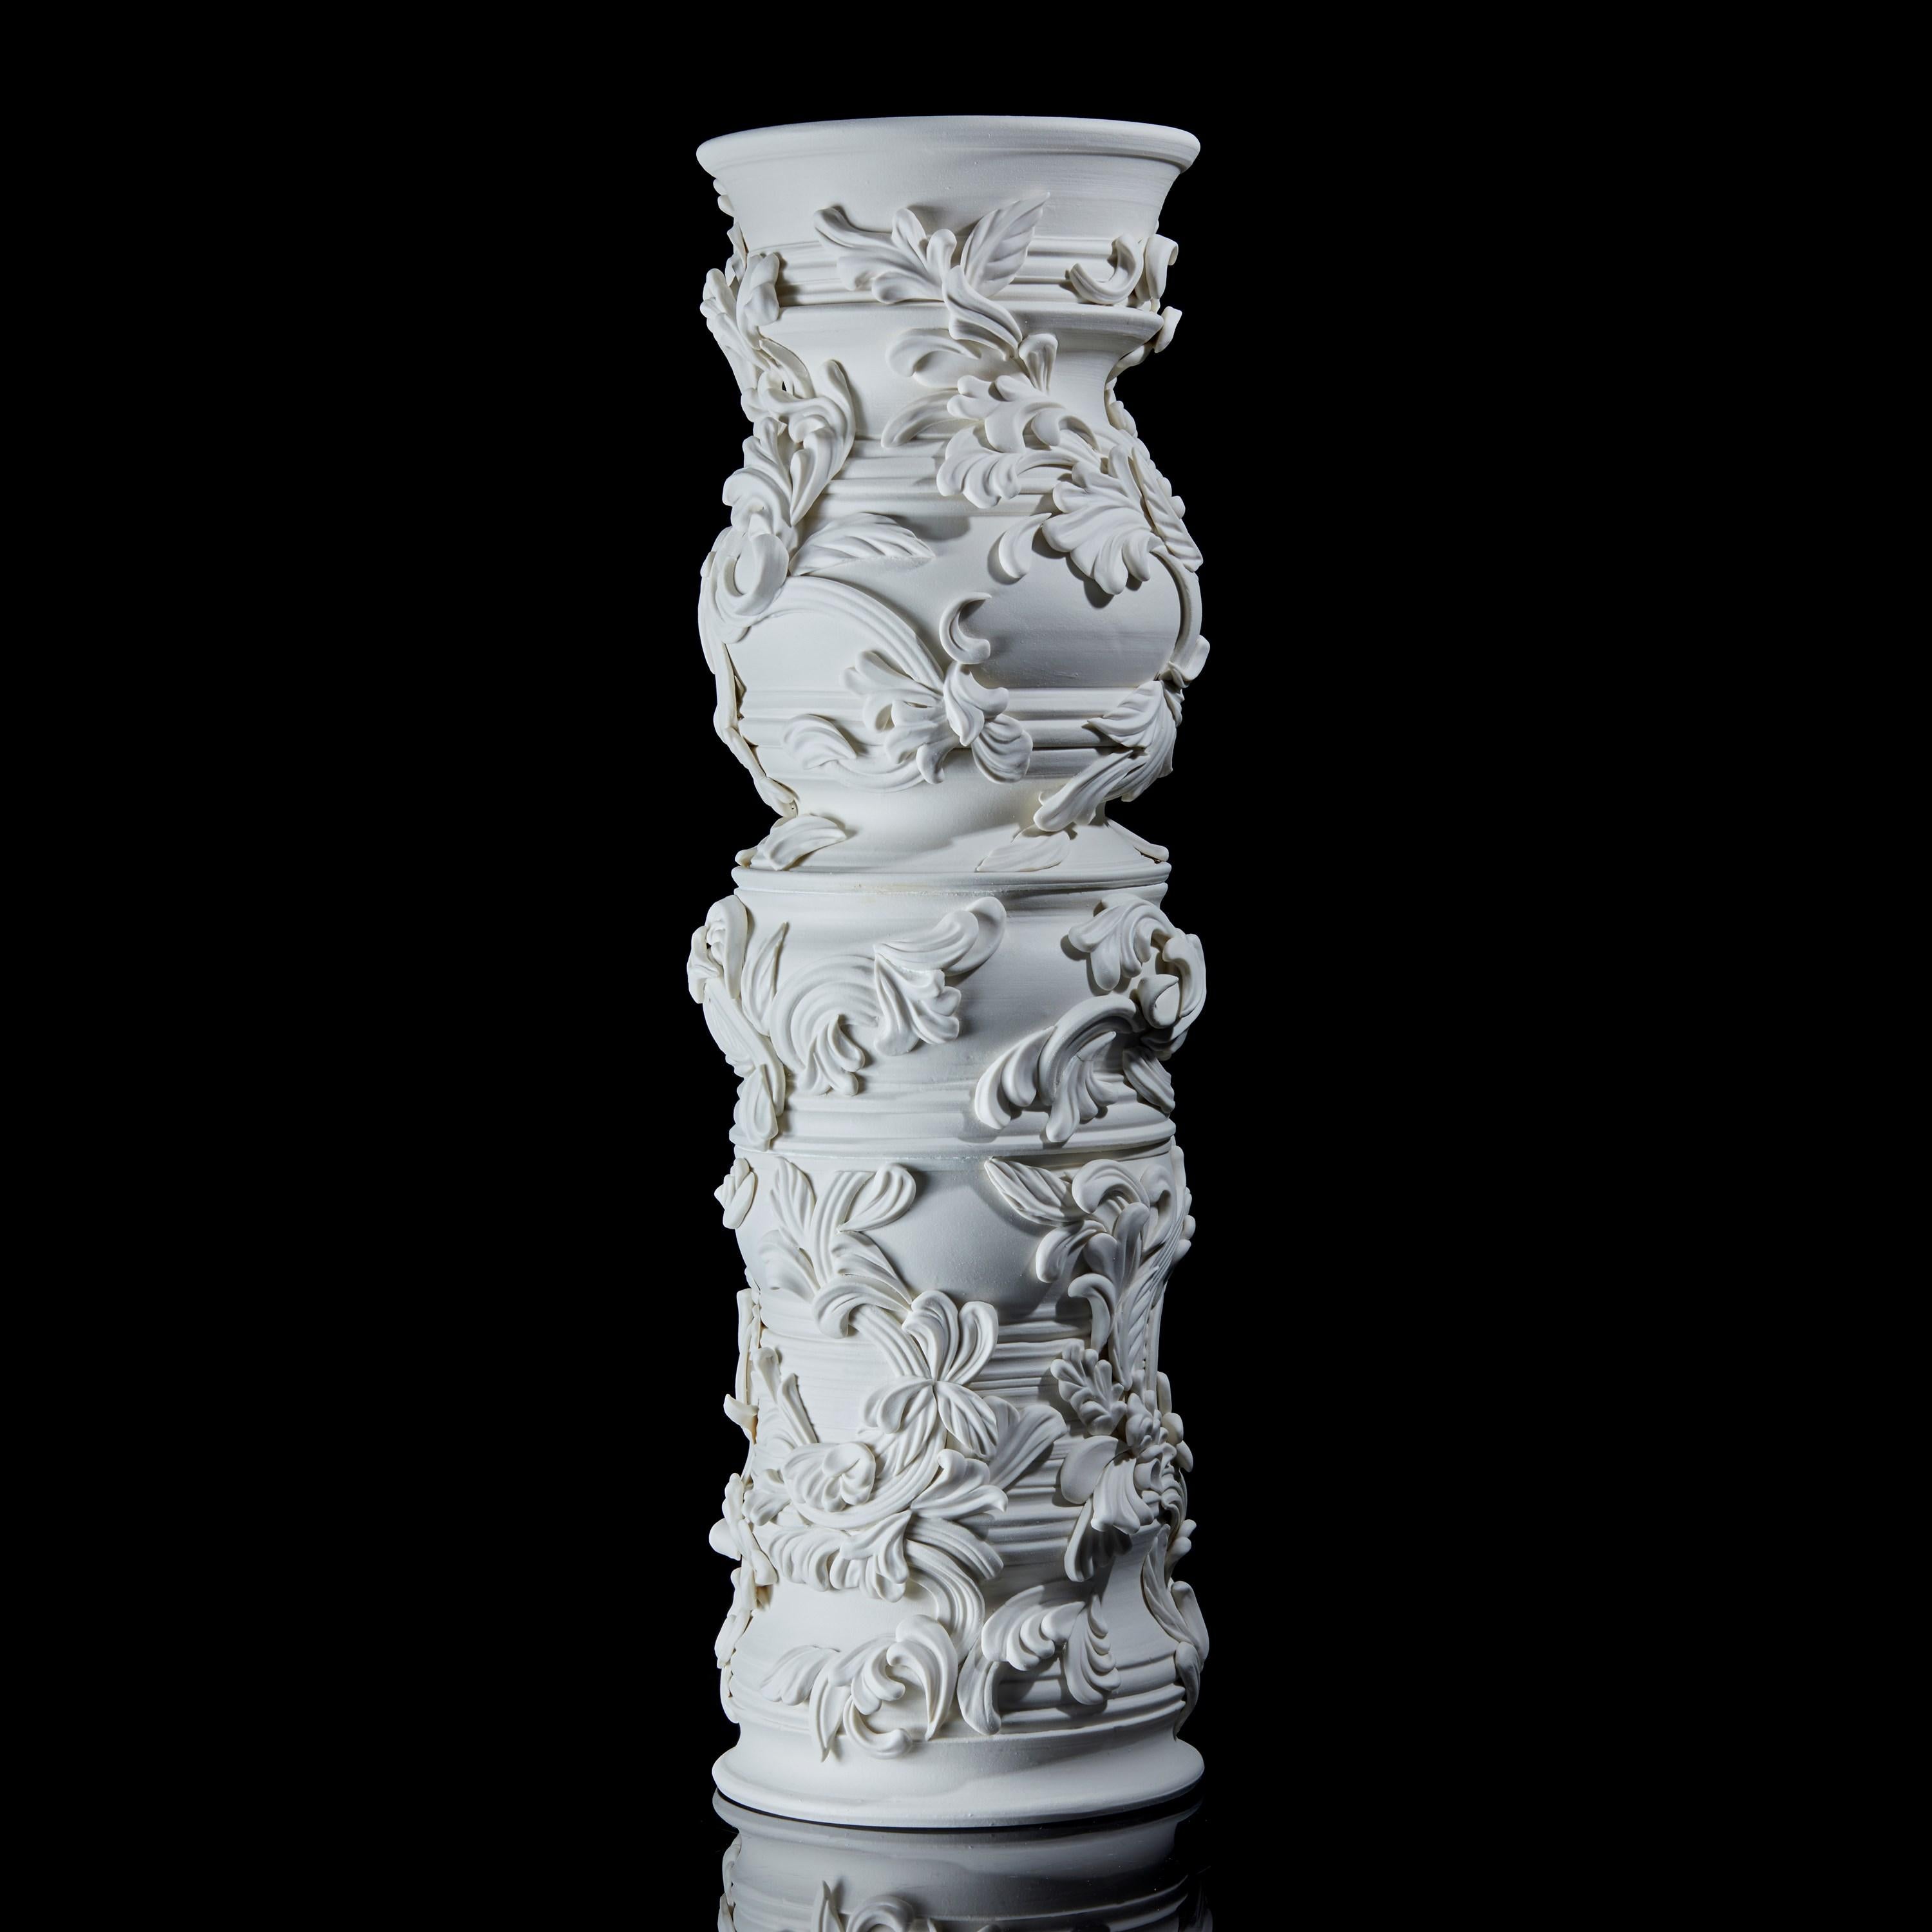 Hand-Crafted Promenade III, a Unique Ceramic Sculptural Tall Vase in Porcelain by Jo Taylor